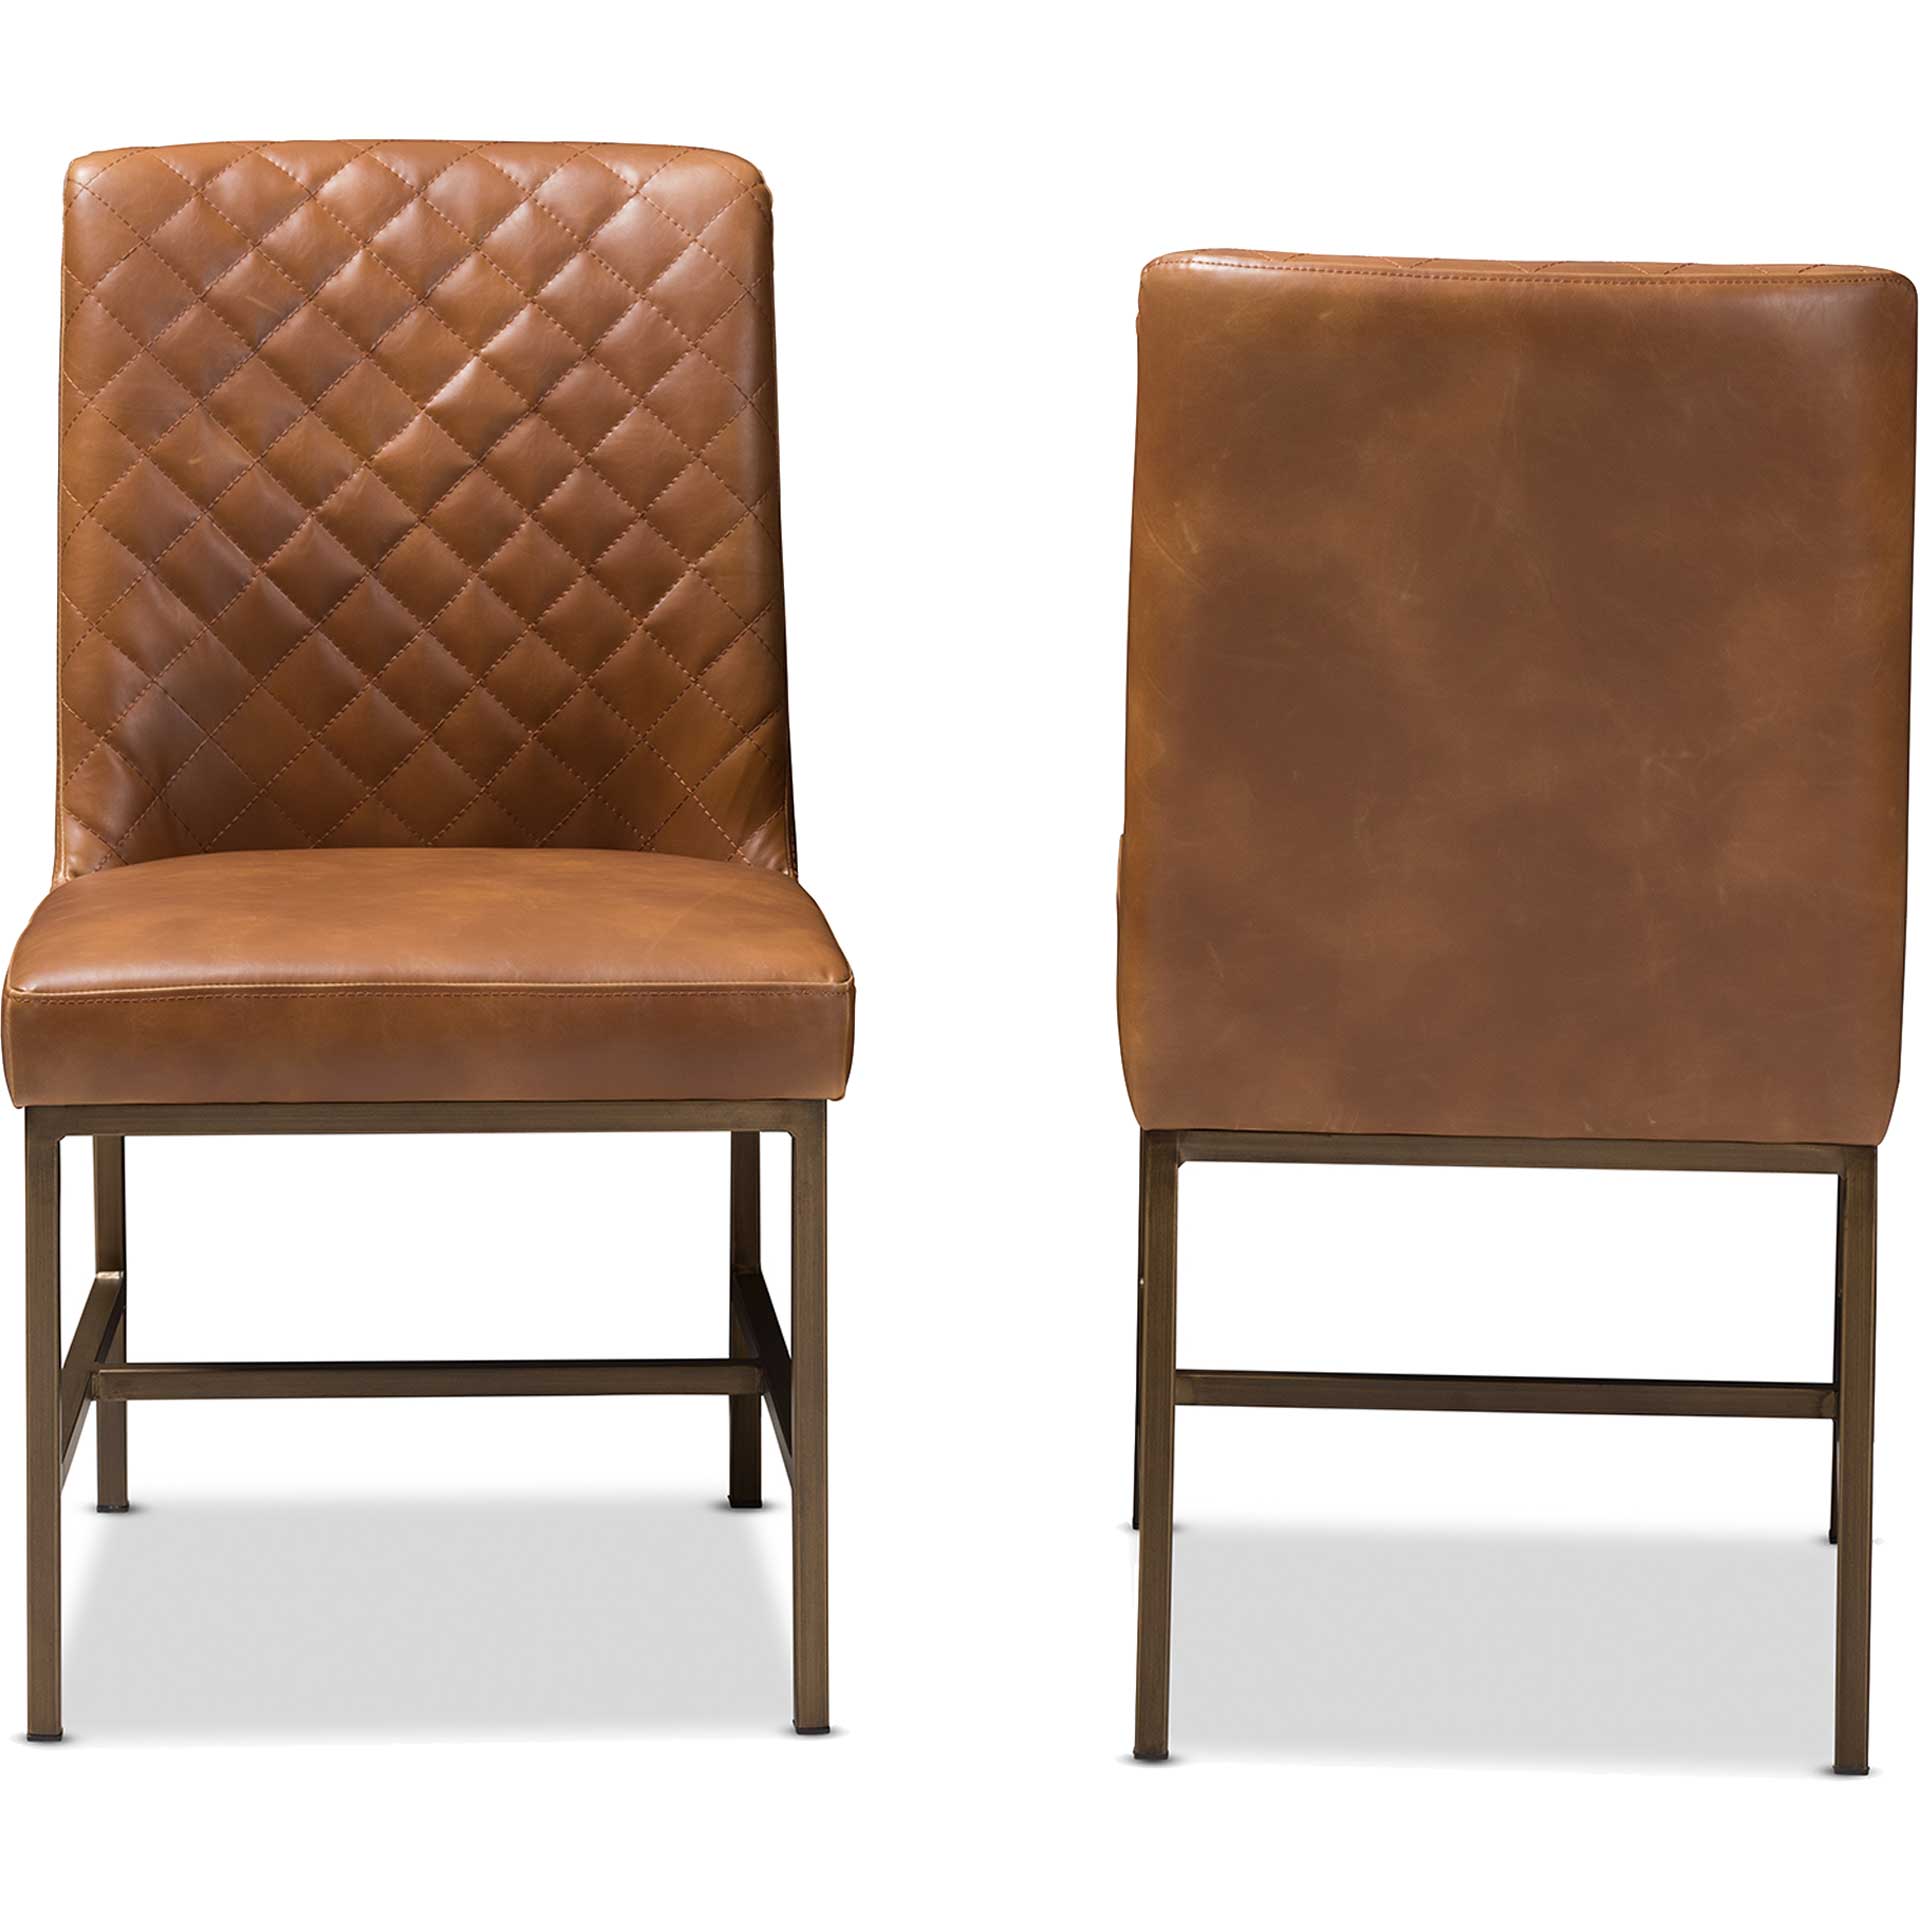 Mabelle Faux Leather Dining Chair Brown (Set of 2)